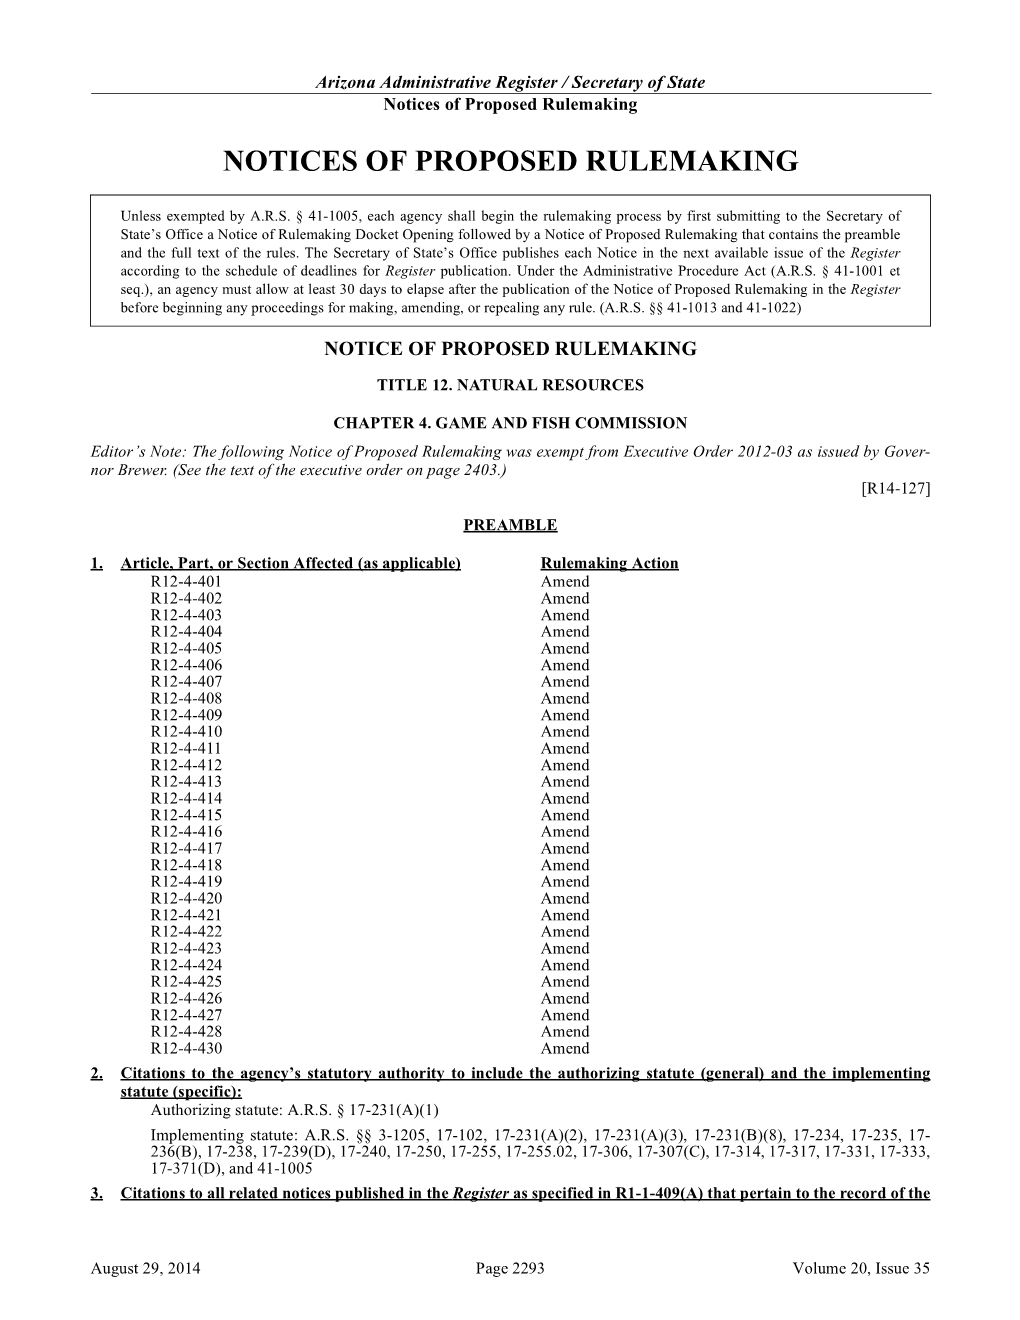 Notices of Proposed Rulemaking